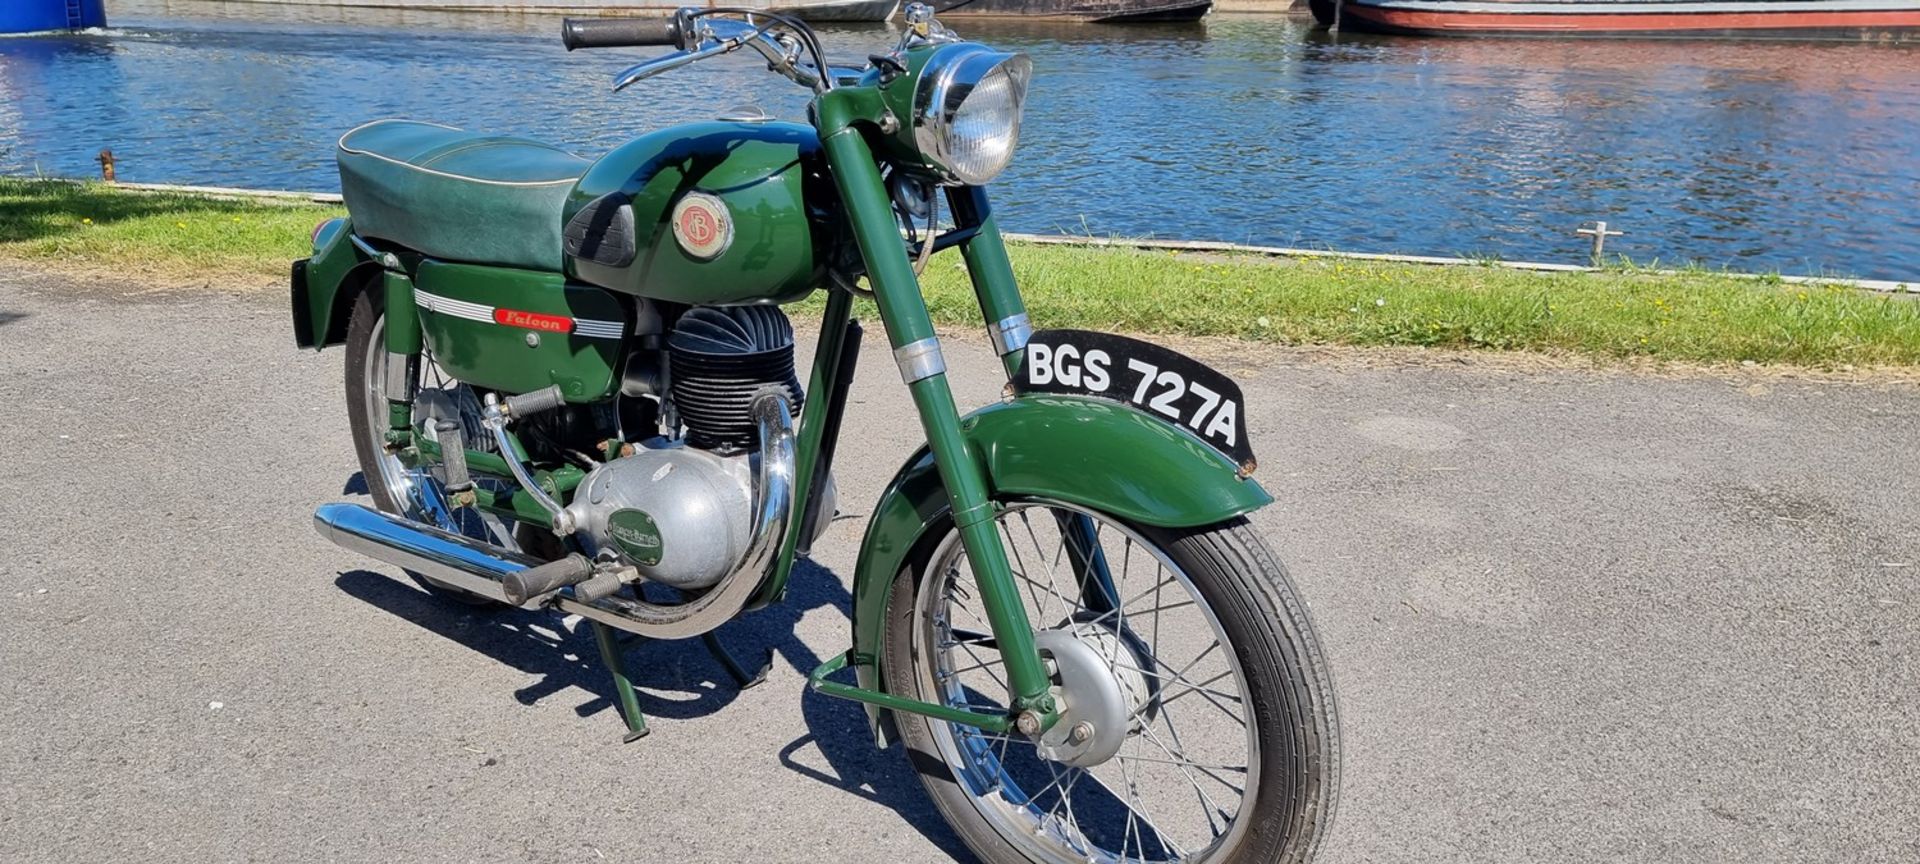 1960 Francis Barnett Falcon 87, 199cc. Registration number BGS 727A. Frame number BF 89027. Engine - Image 15 of 15